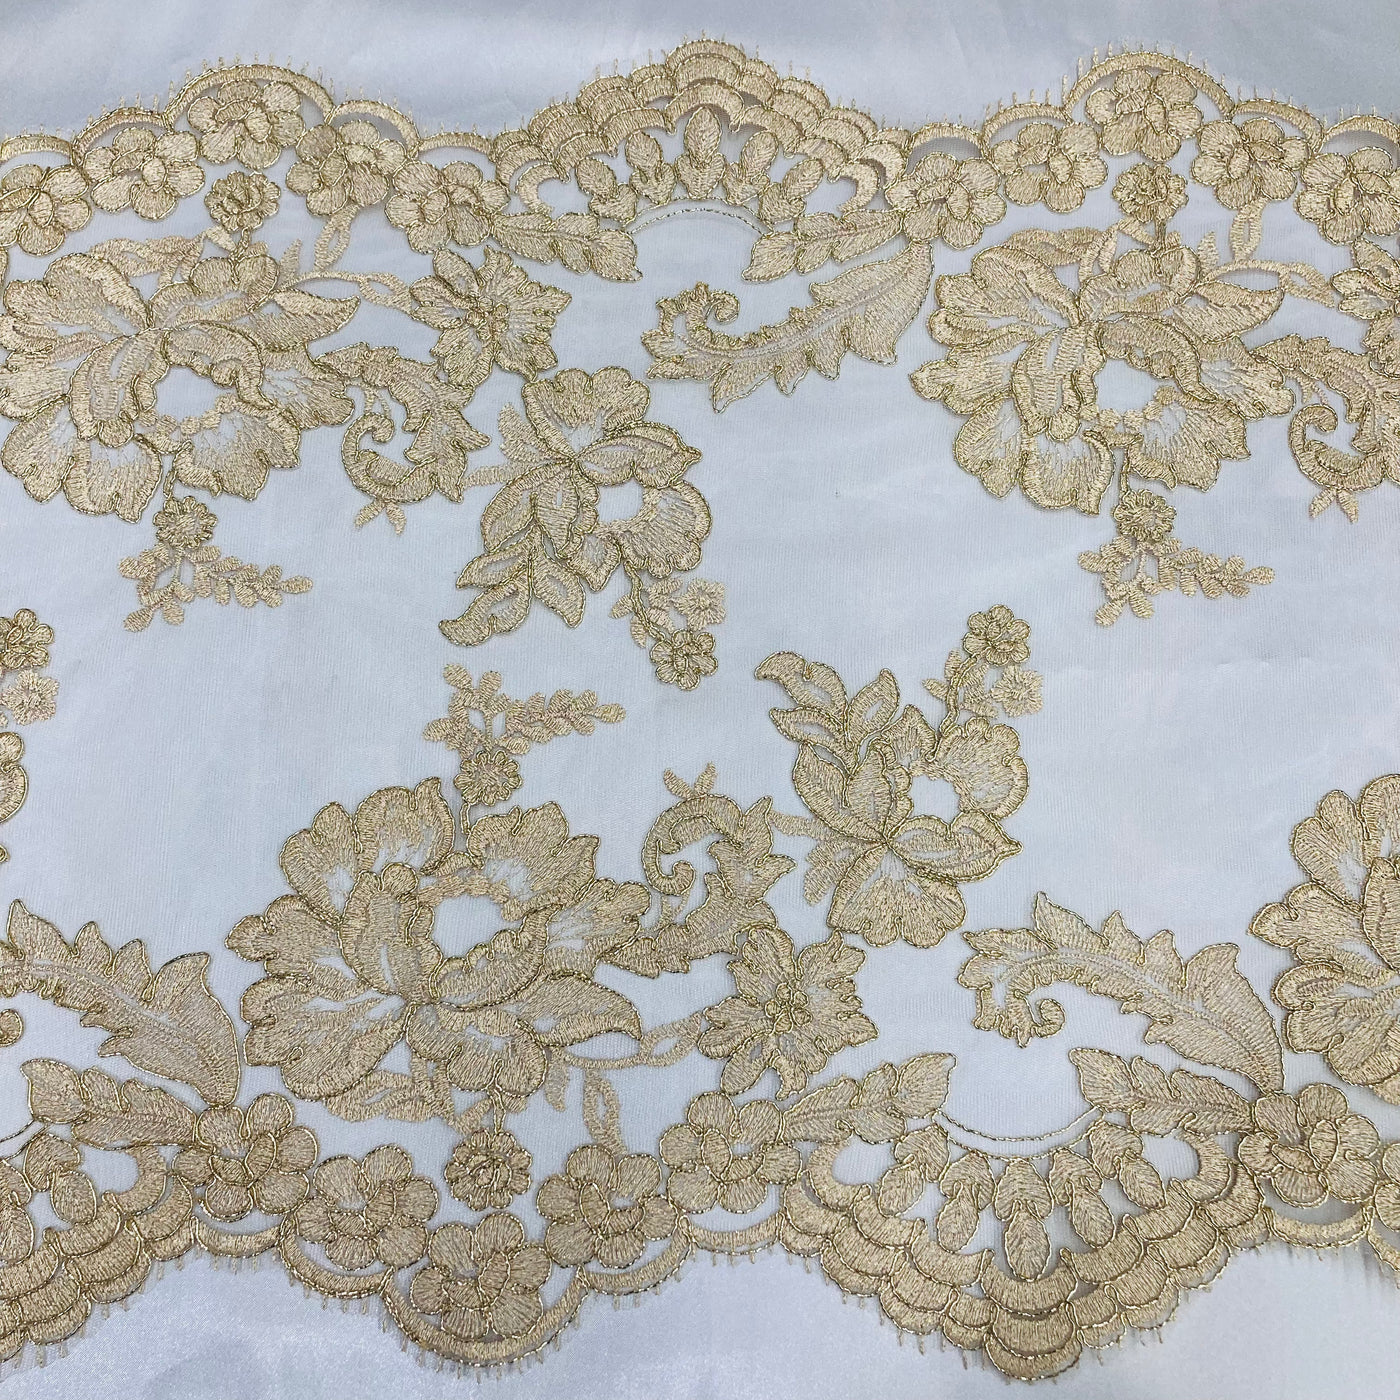 Double Sided Floral Lace Trimming Corded Embroidered on 100% Poly. Net Mesh | Lace USA